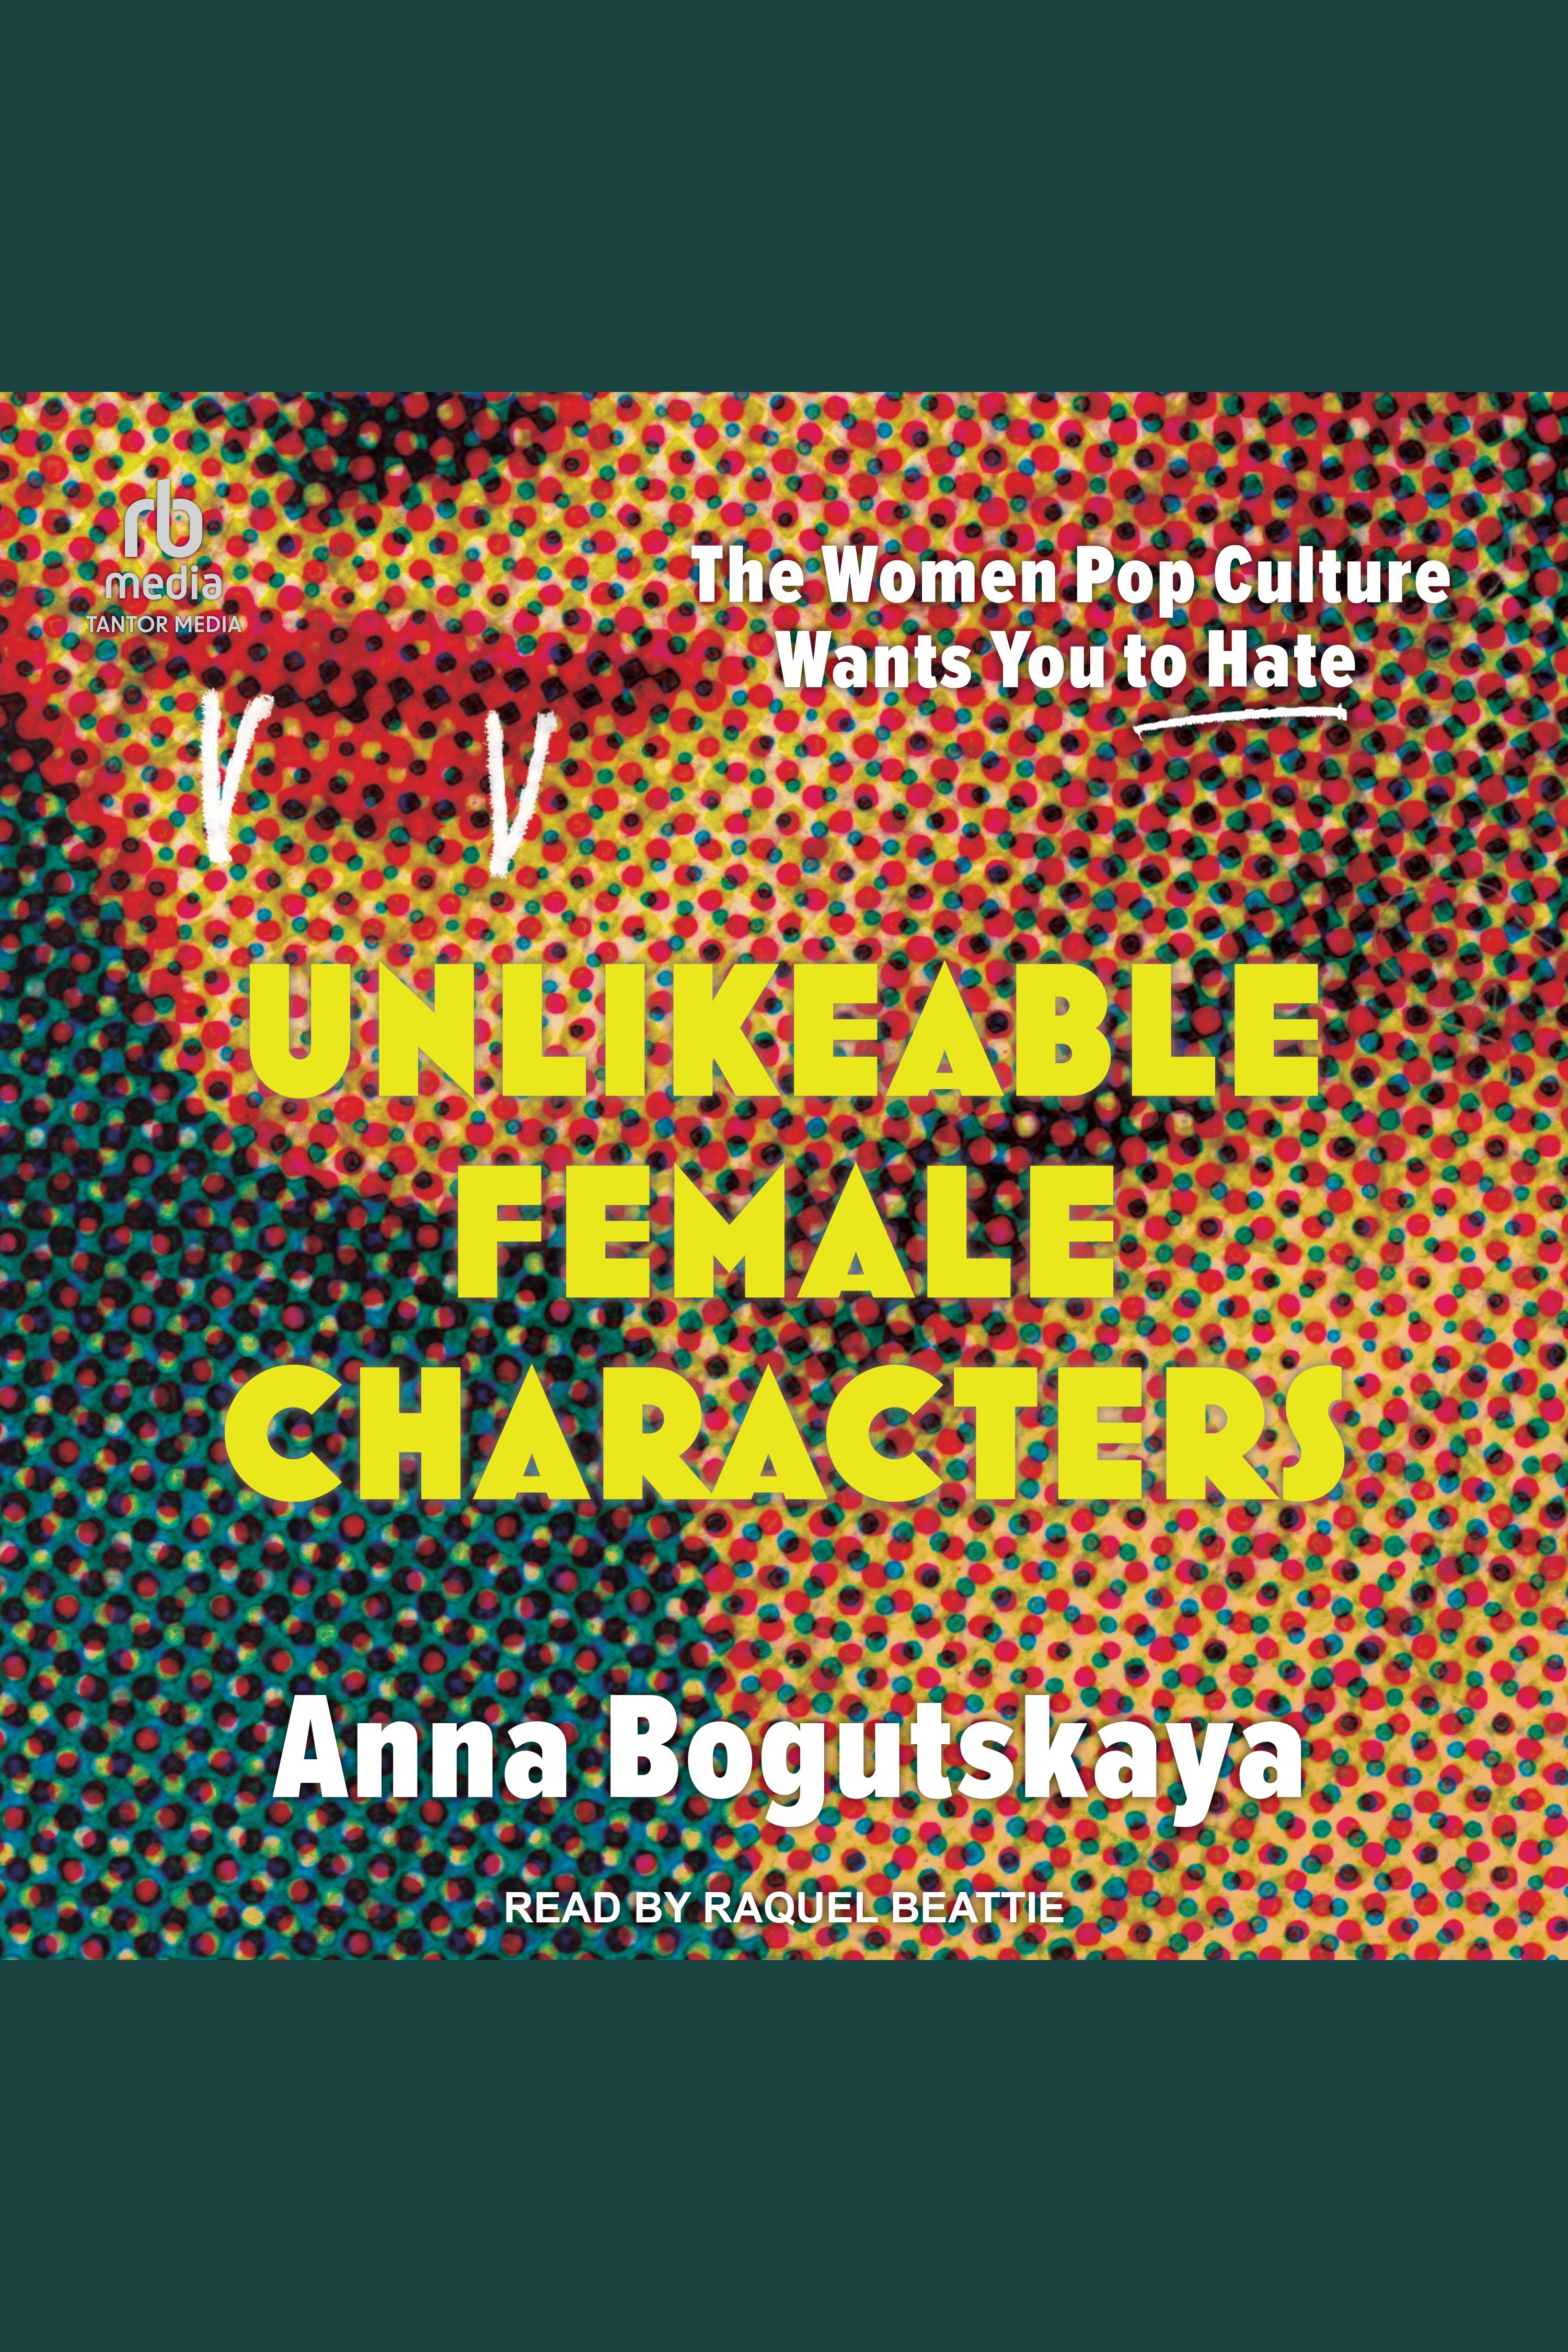 Unlikeable Female Characters The Women Pop Culture Wants You to Hate cover image